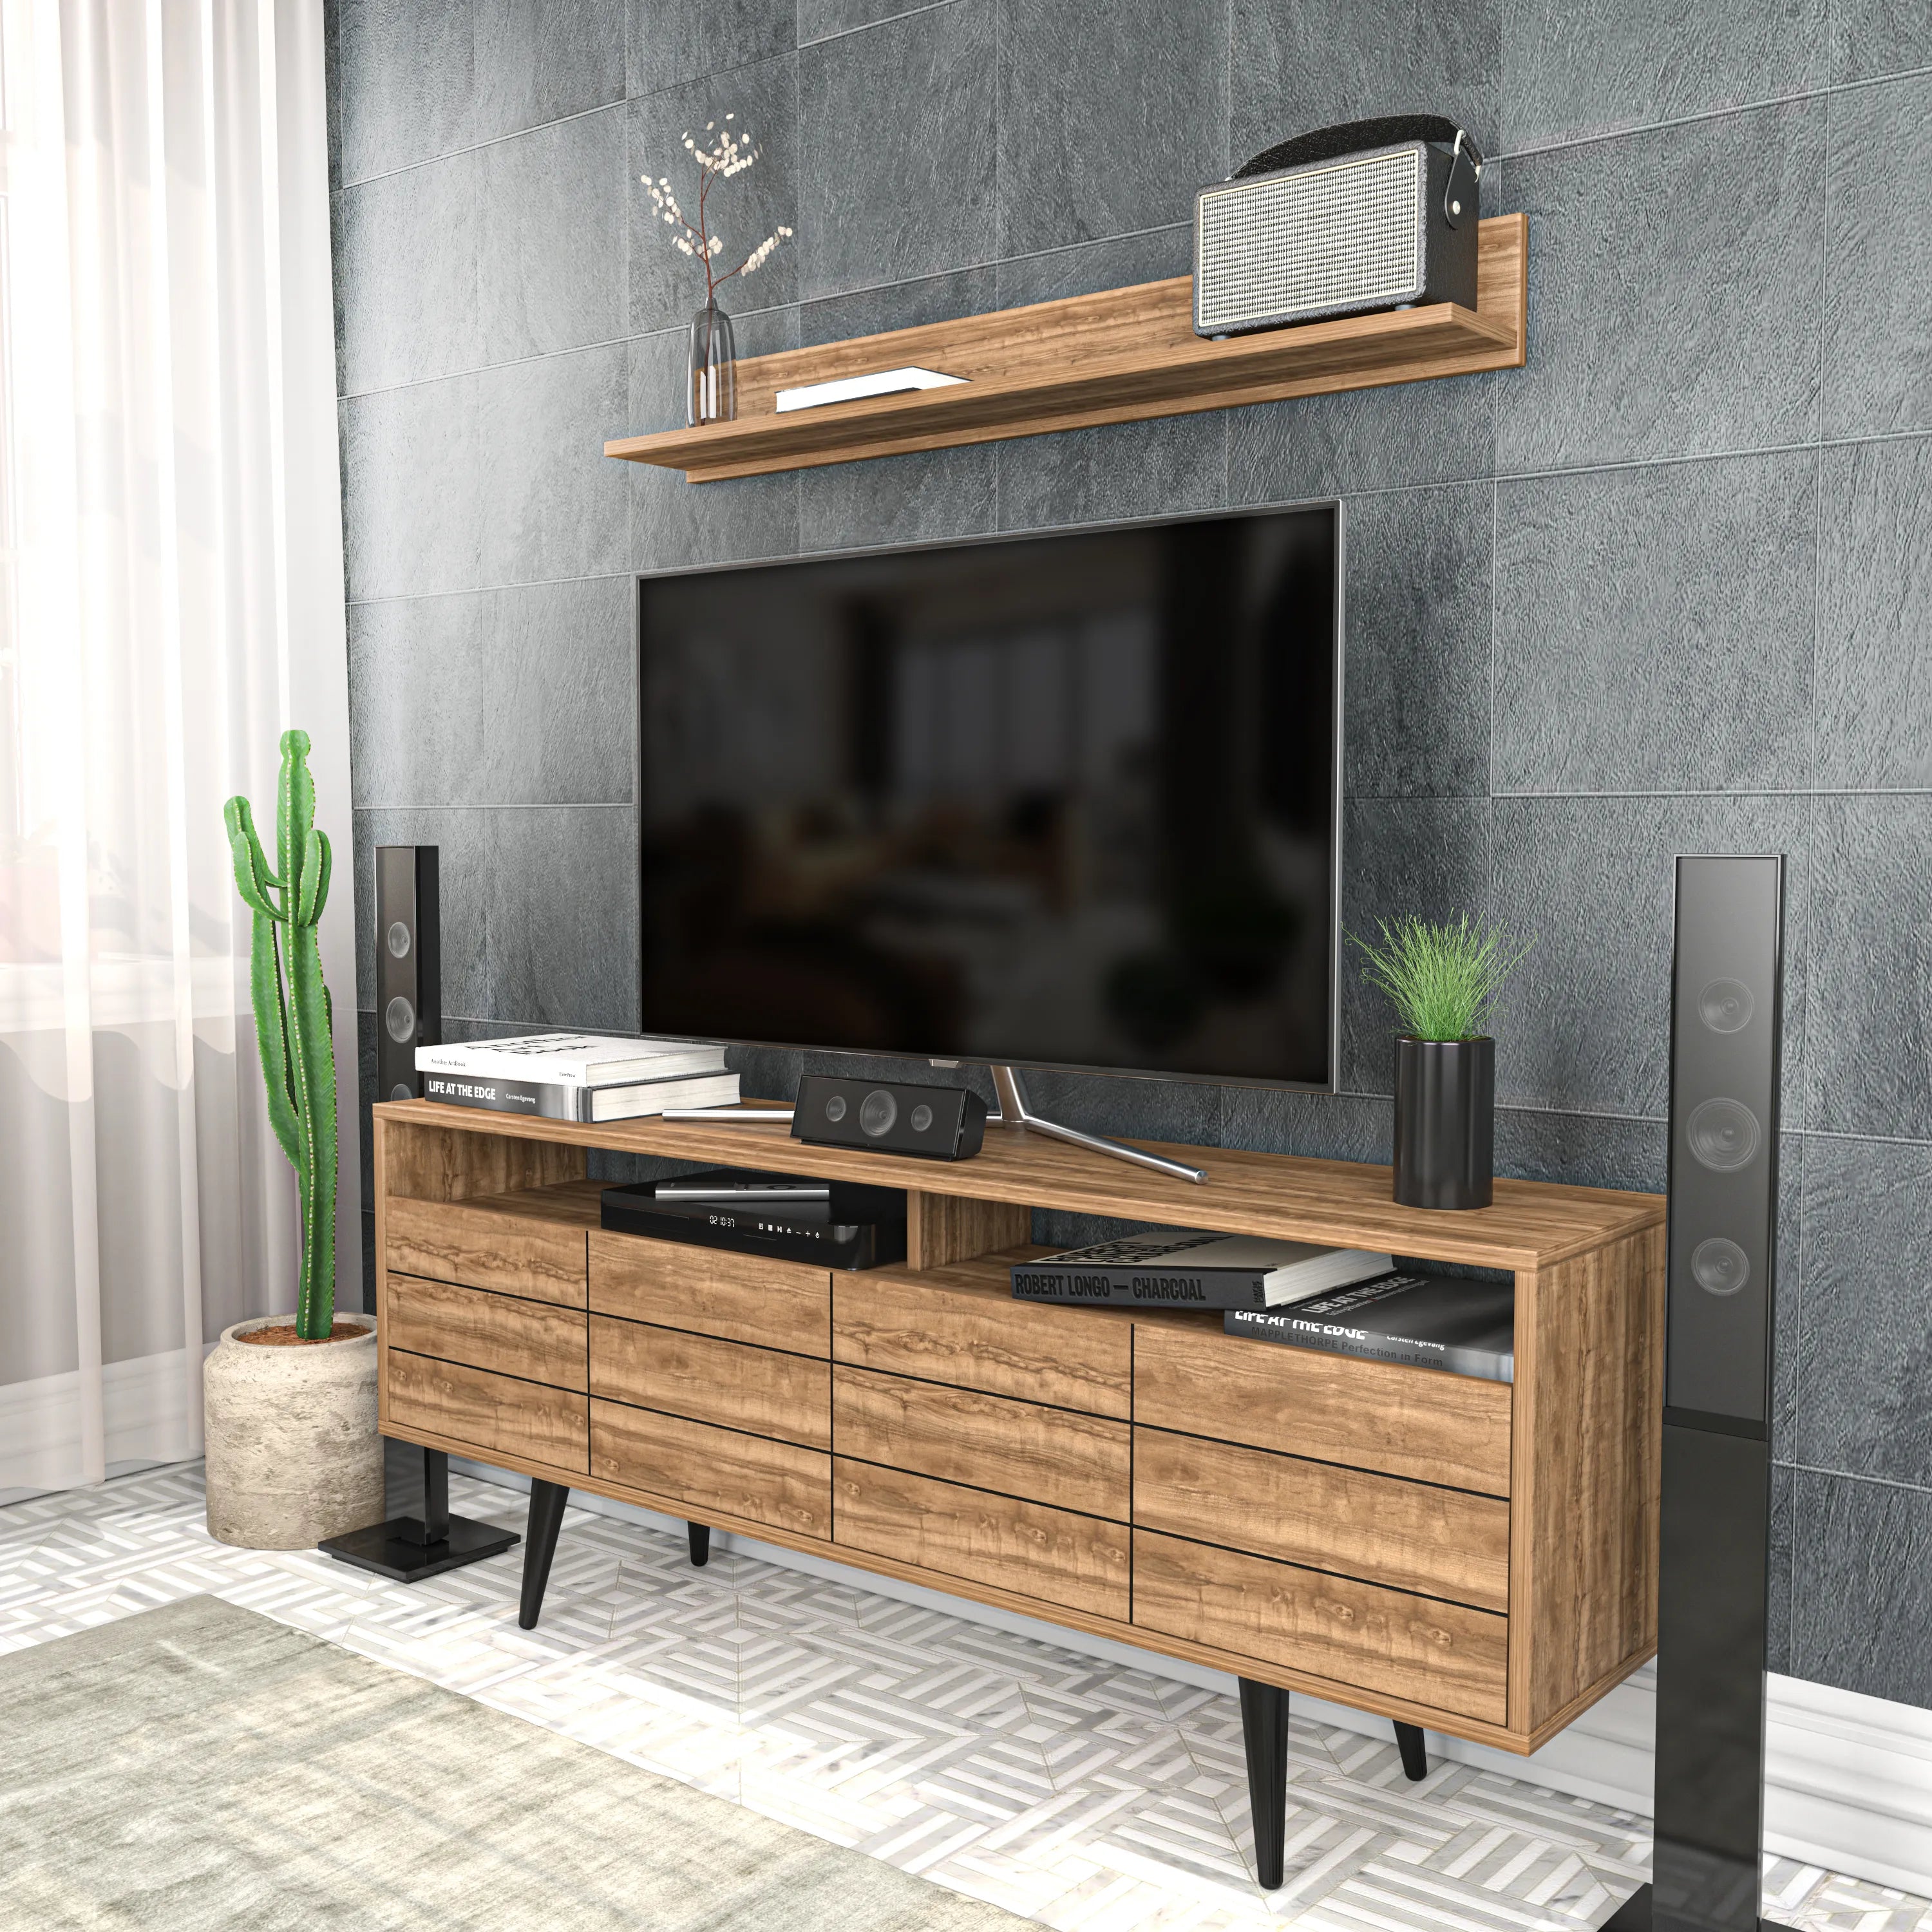 Ola 63 inch Wide TV Stand Media Console with Wall Shelf for TVs up to 72 inch